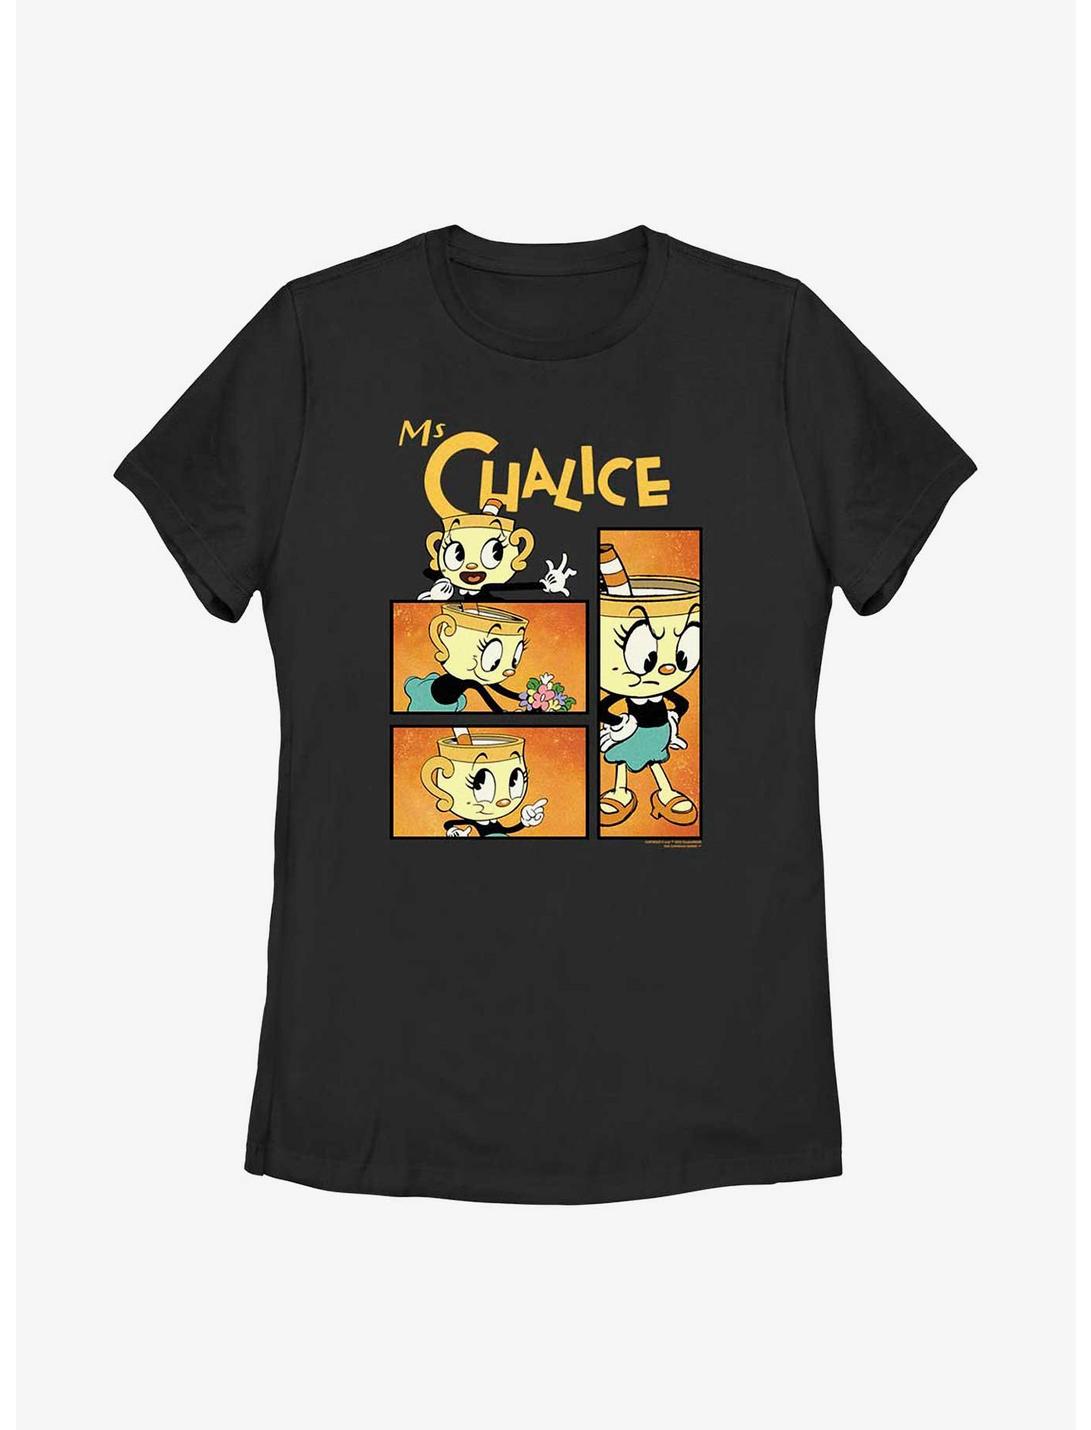 The Cuphead Show! Ms. Chalice Panels Womens T-Shirt, BLACK, hi-res